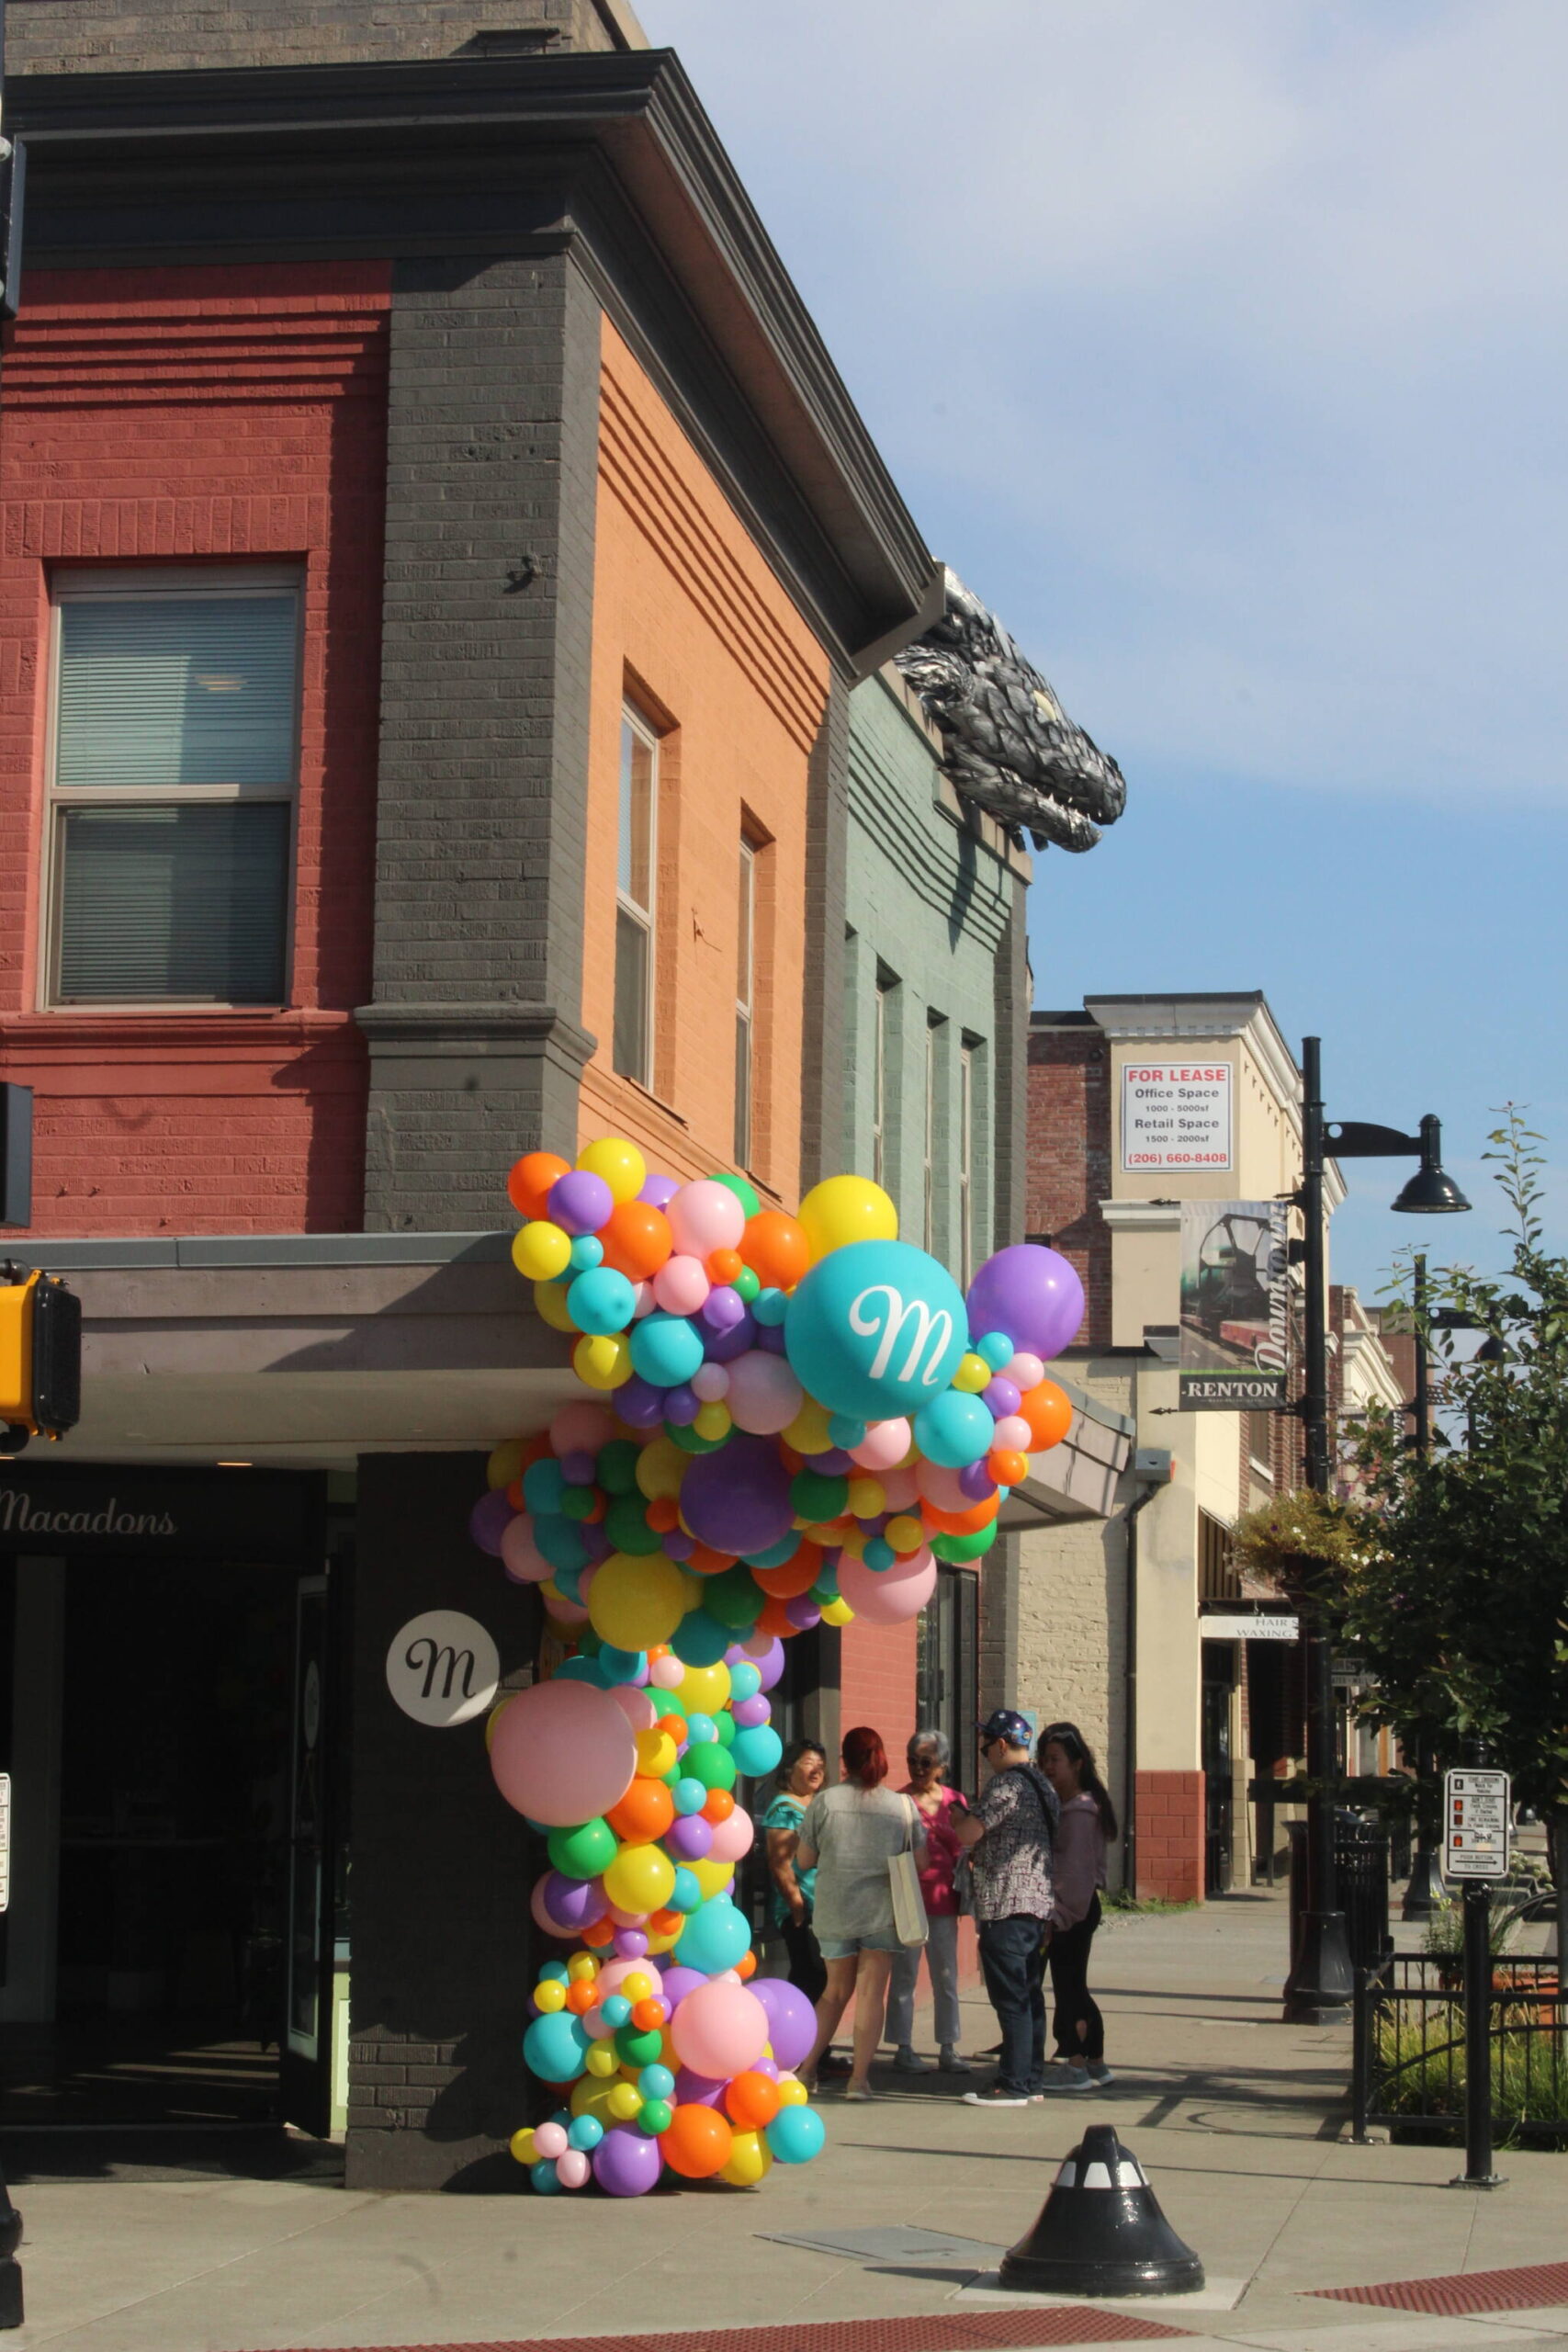 Photo by Bailey Jo Josie/Sound Publishing
Macadons decorated their corner building with colorful balloons.